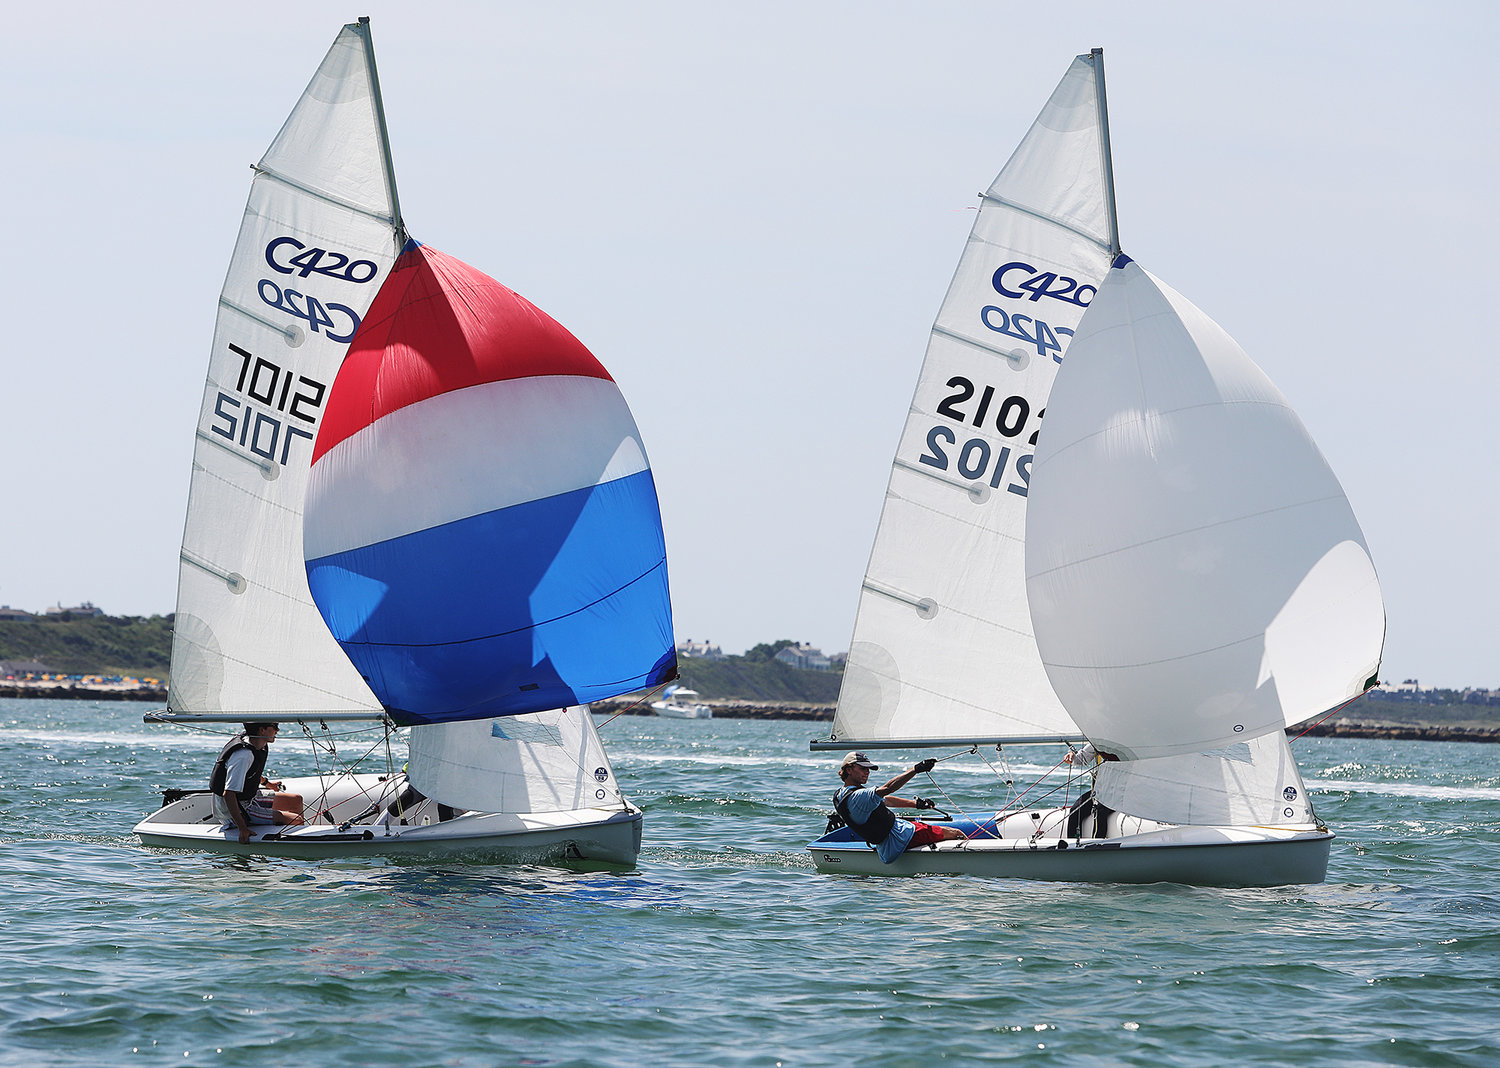 Spinnakers are up during the Youth 420 Regatta at last year’s Nantucket Race Week.